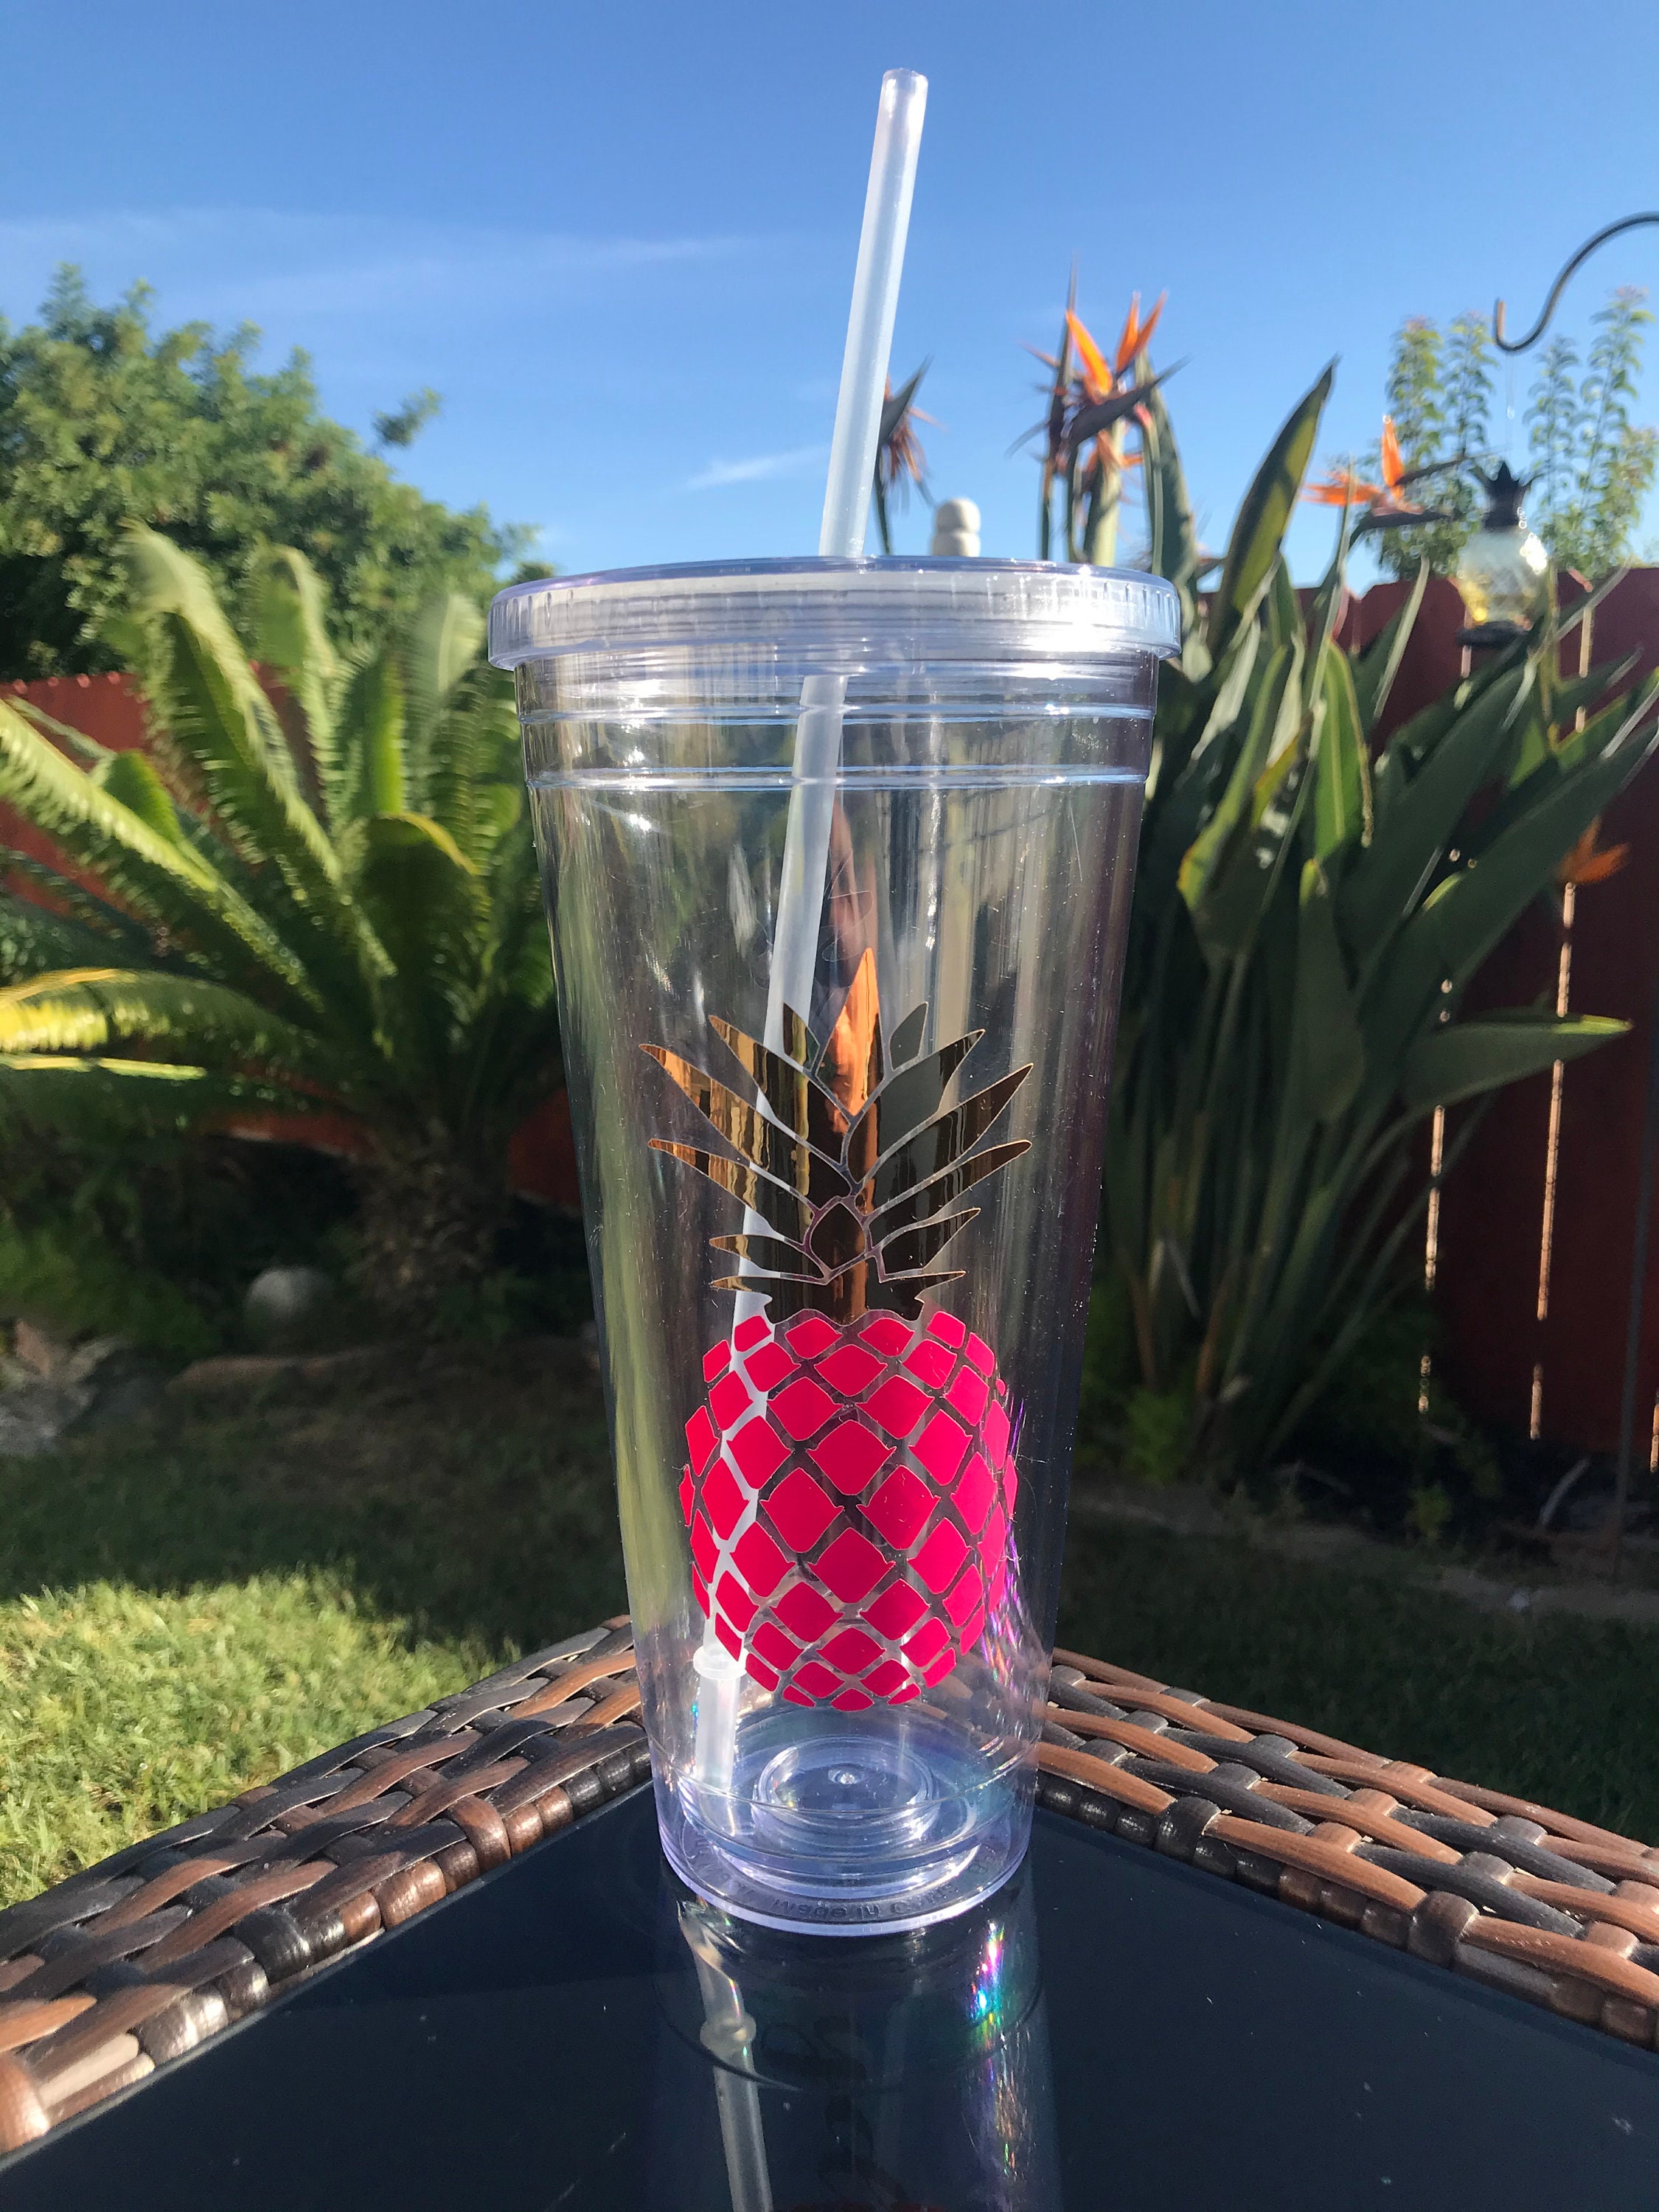 32 oz Tumbler - Hot or Cold - w/ Stainless Steel Straw — 1000